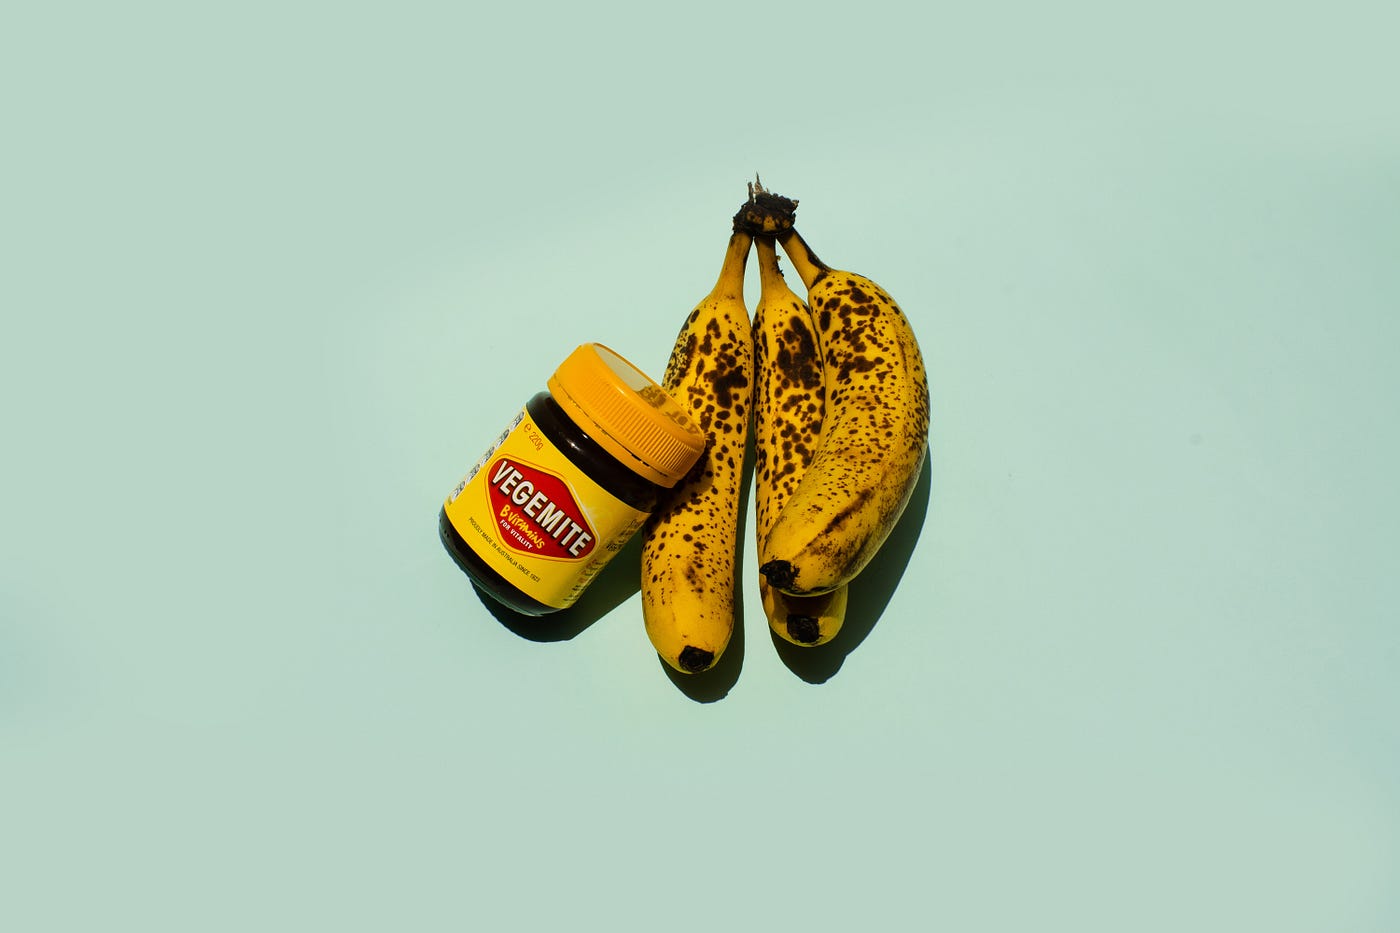 The smell of Vegemite explained, Life and style